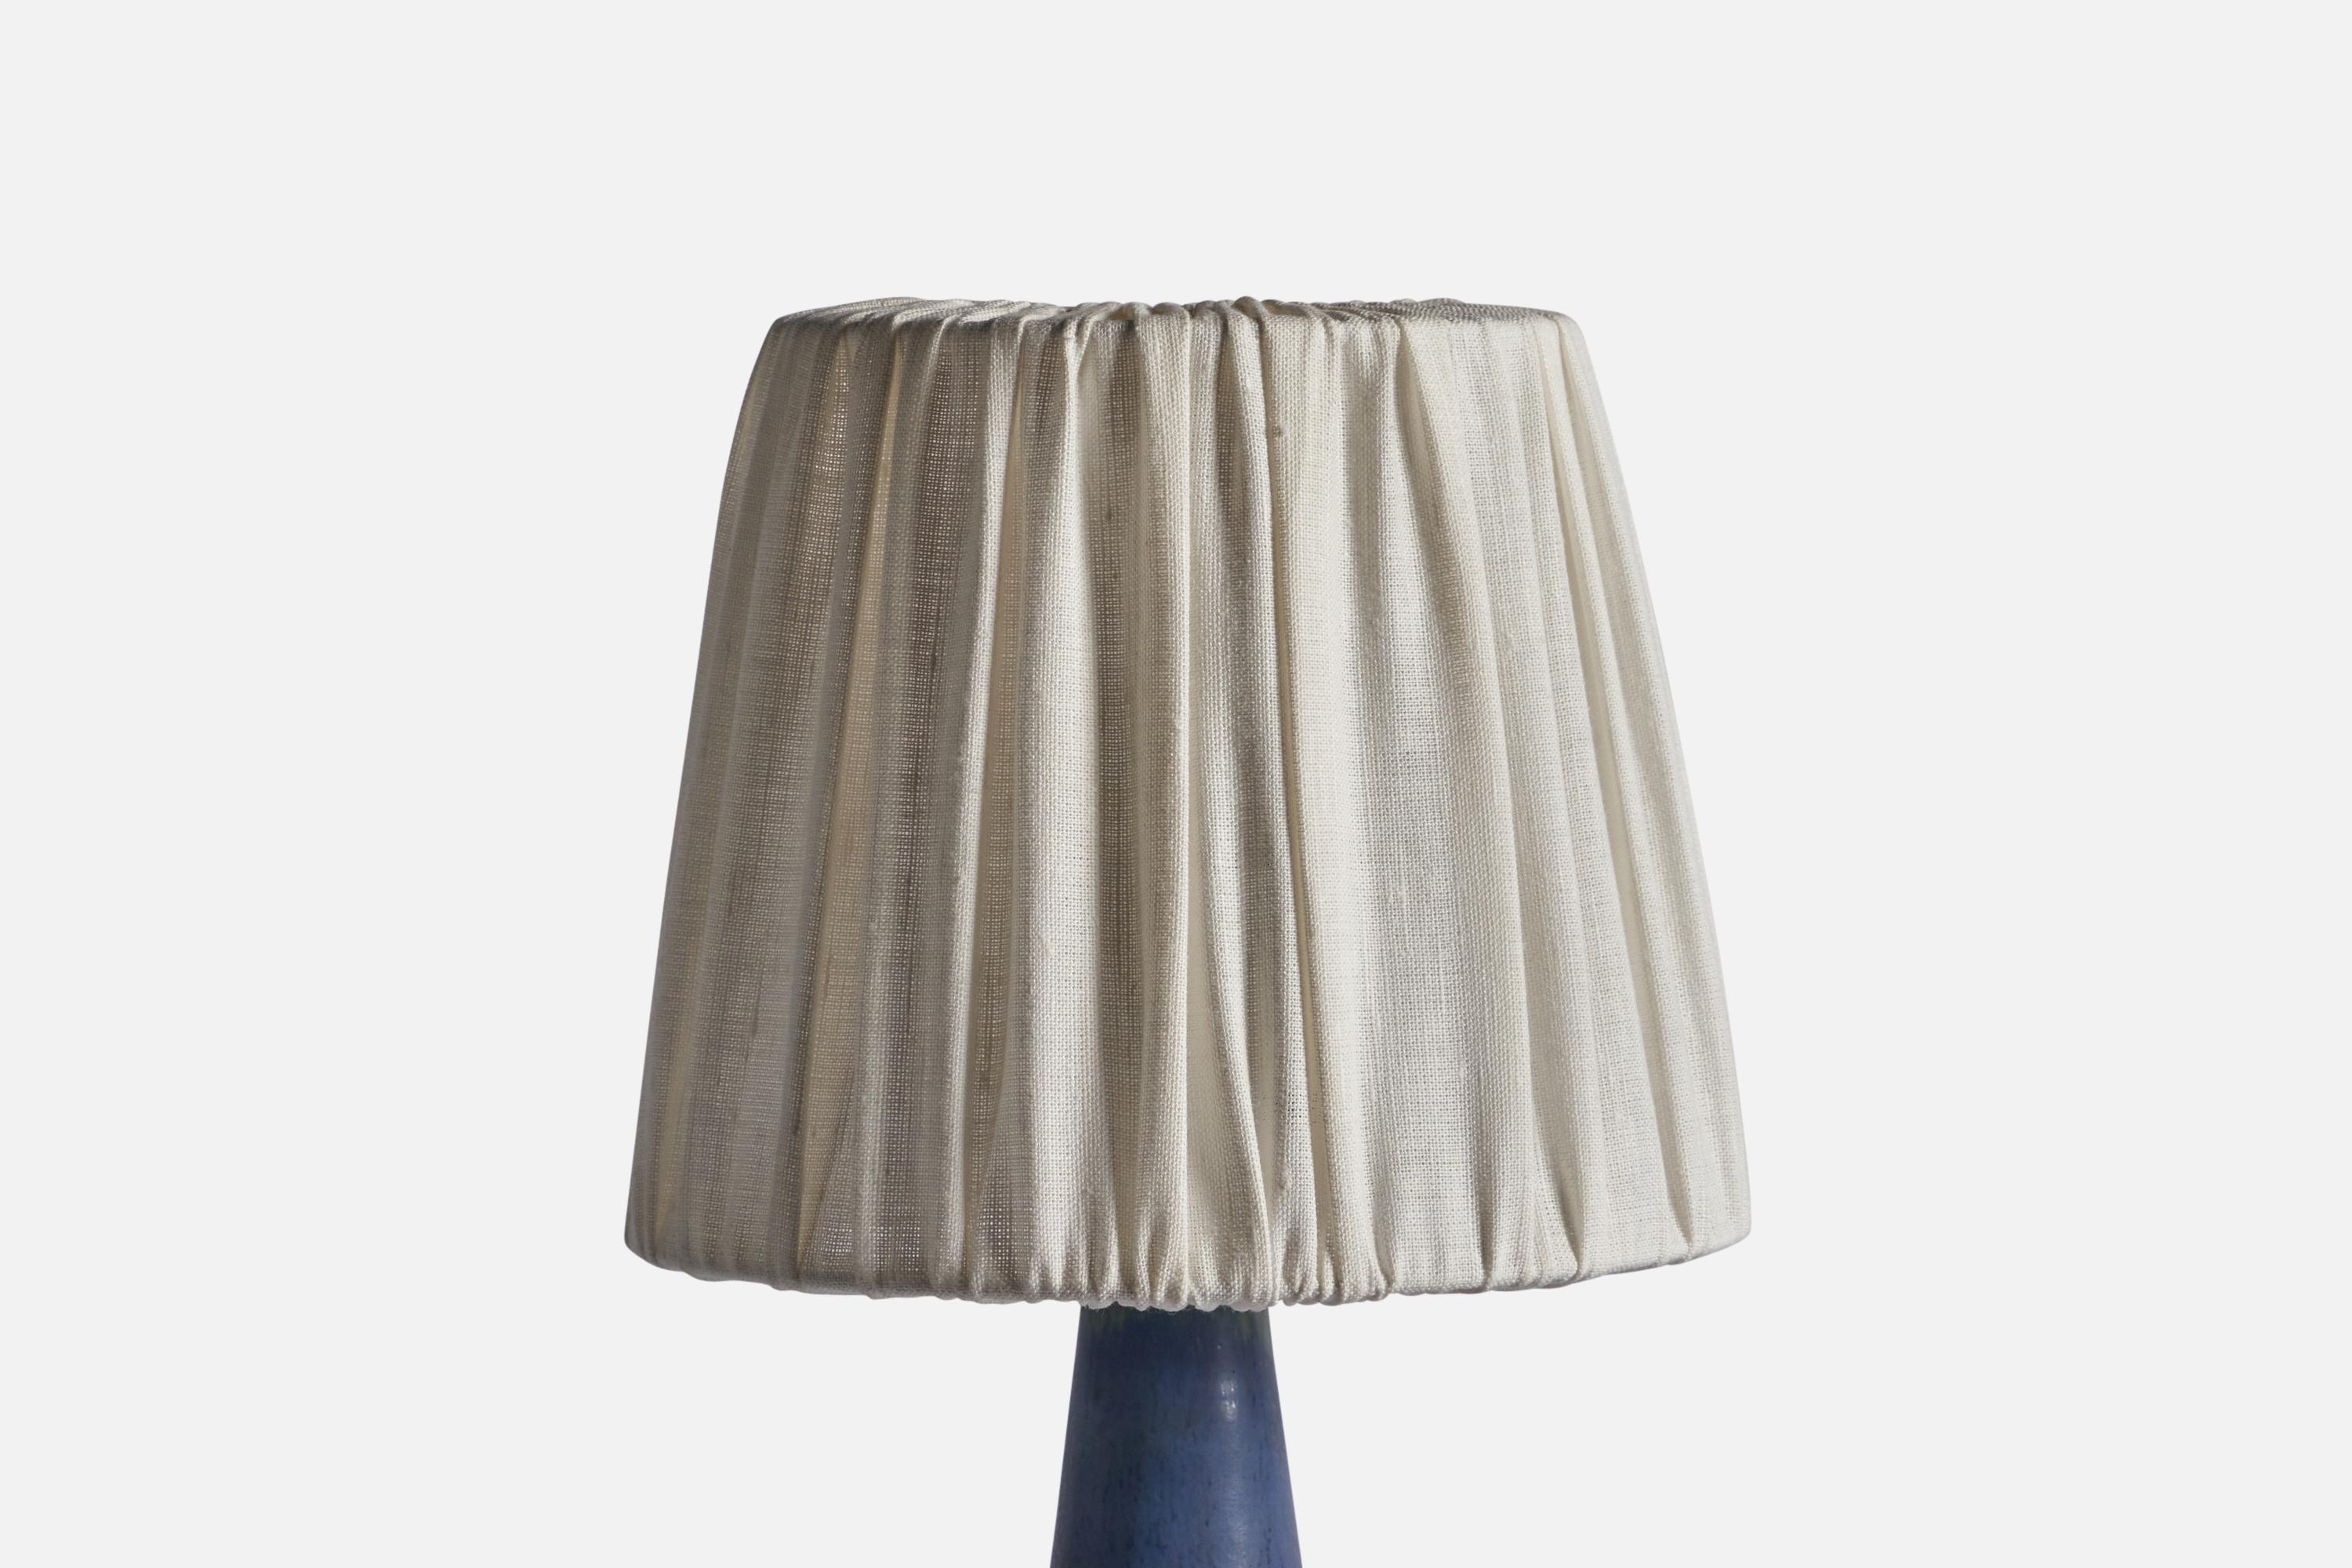 A stoneware and off-white fabric table lamp designed by Marianne Starck and produced by Michael Andersen, Bornholm, Denmark, 1960s.

Sold with lampshade

Stated dimensions include lampshade.

Size of base including height of socket, H 12.5, diameter